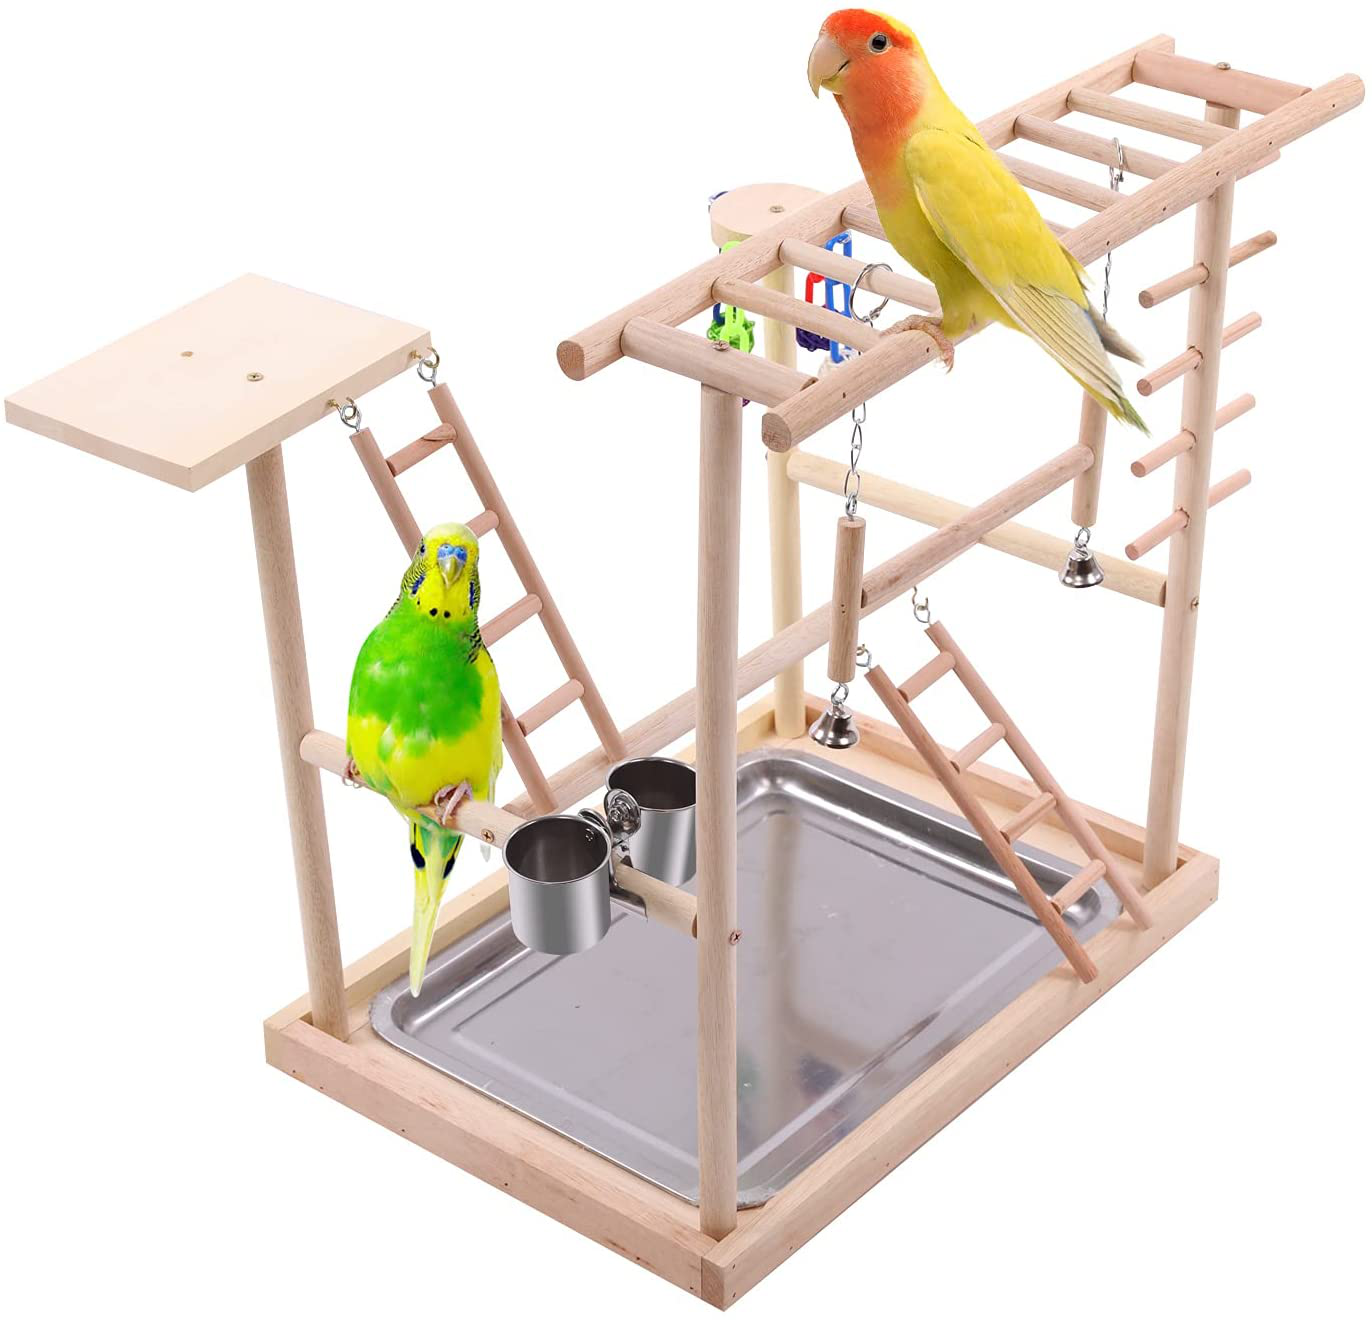 QBLEEV Bird Perches Nest Play Stand Gym Parrot Playground Playgym Playpen Playstand Swing Bridge Wood Climb Ladders Wooden Conures Parakeet Macaw African Animals & Pet Supplies > Pet Supplies > Bird Supplies > Bird Gyms & Playstands QBLEEV   